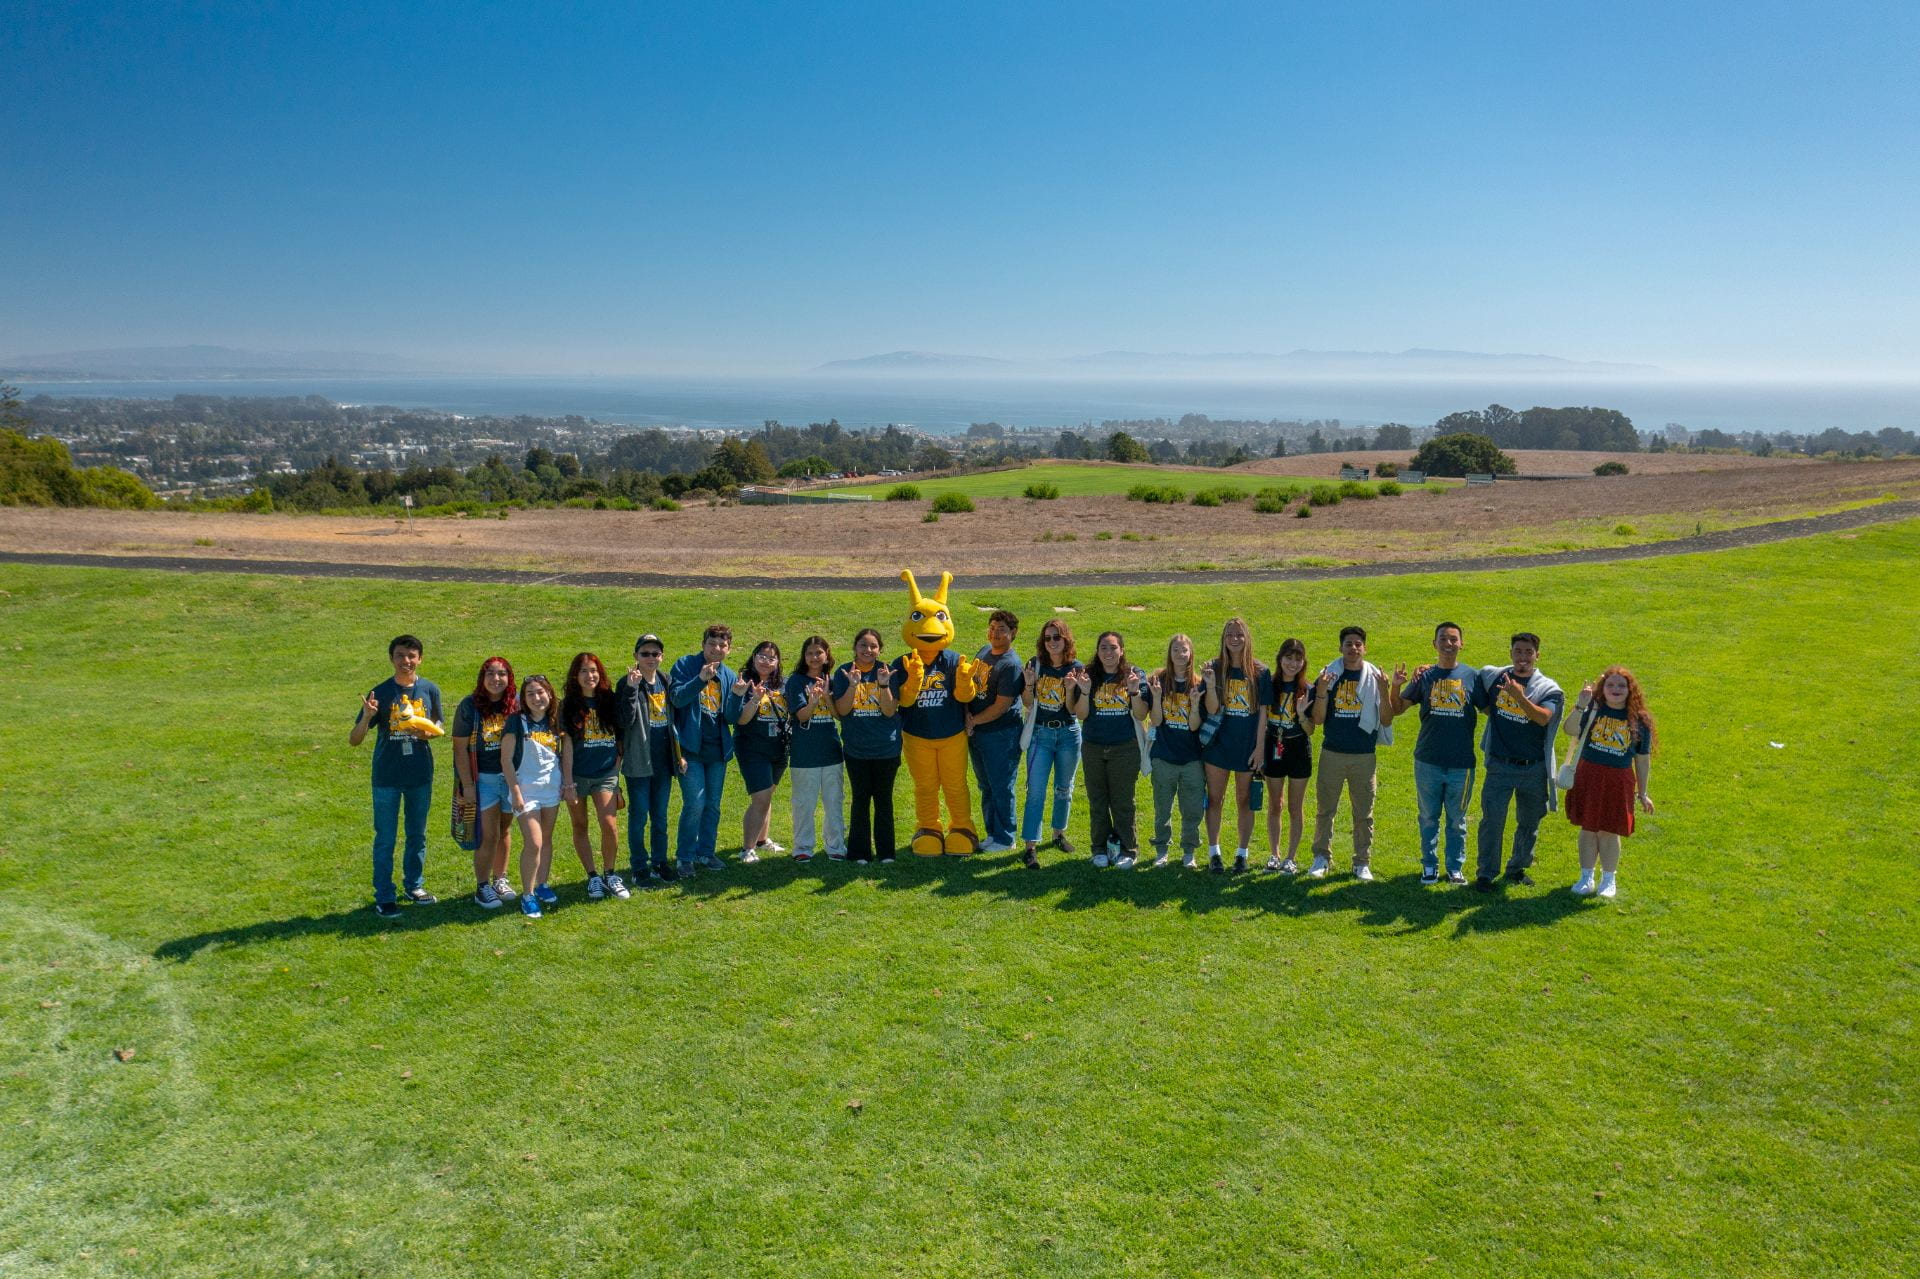 Students stand with Sammy the Mascot